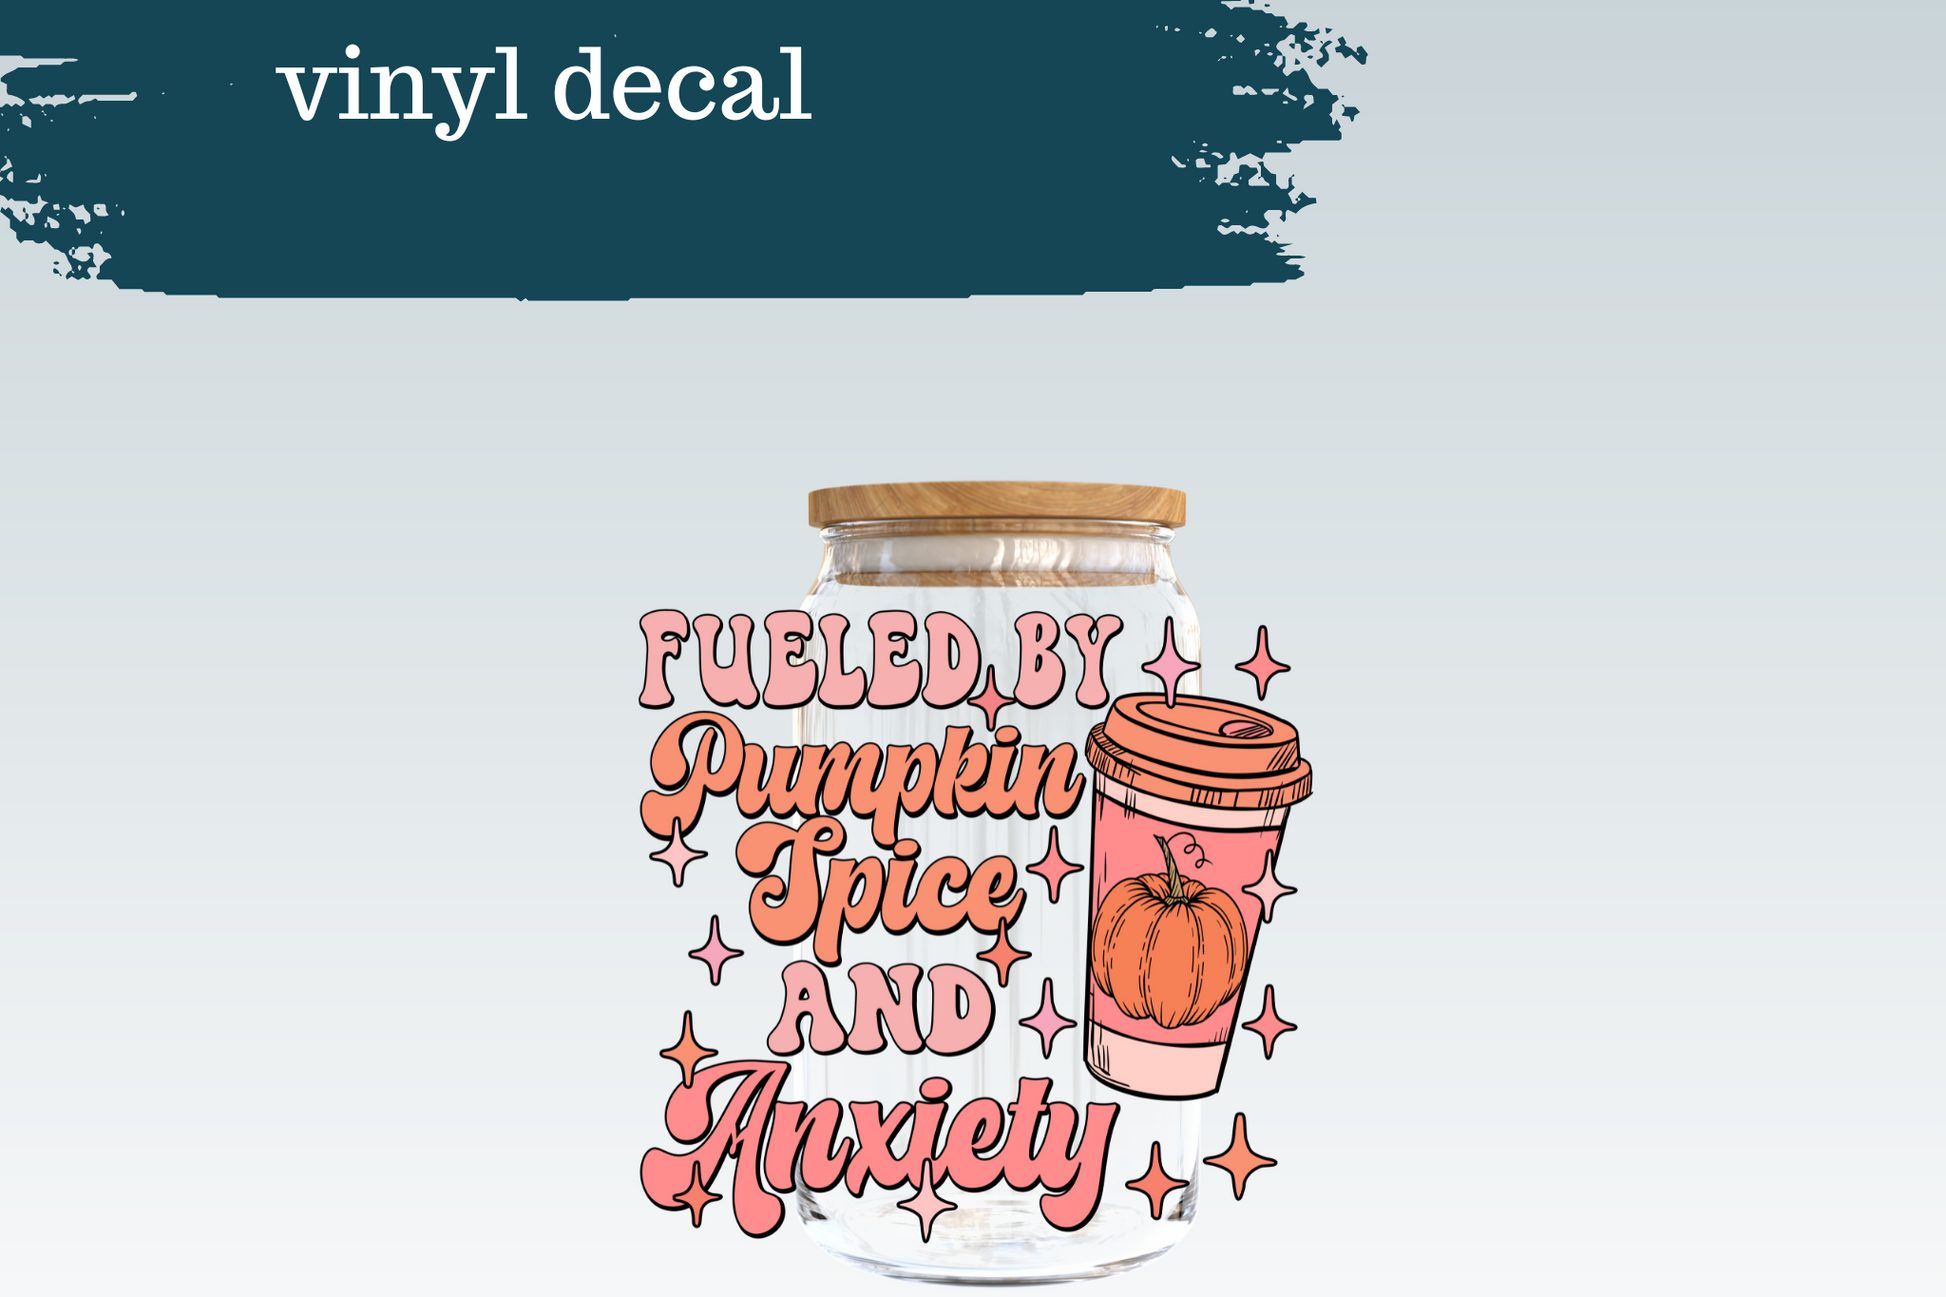 Fueled by Anxiety & Pumpkin Spice | Decal Vinyl